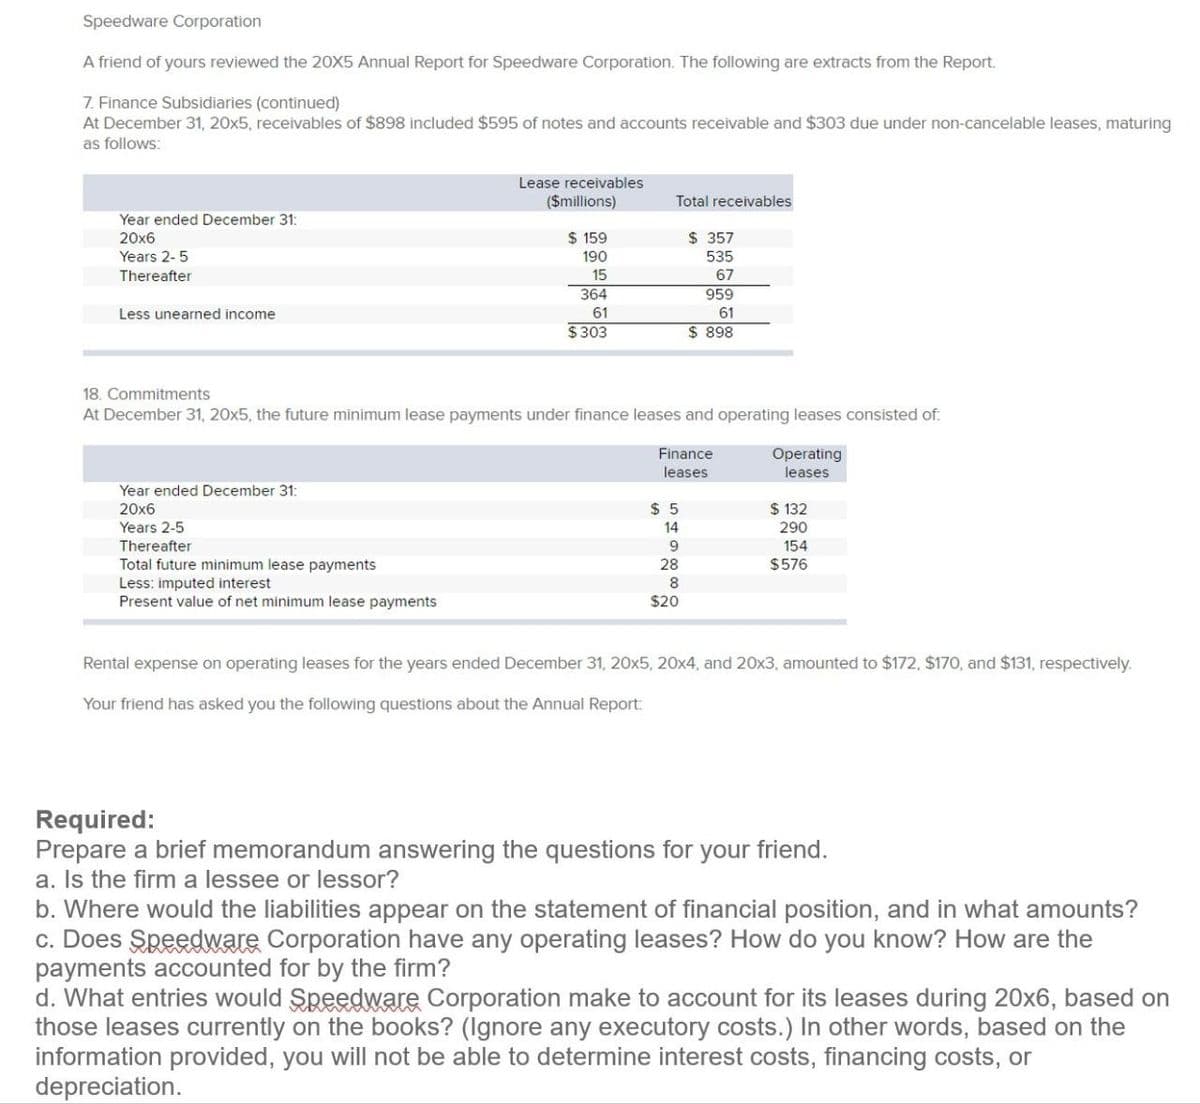 Speedware Corporation
A friend of yours reviewed the 20X5 Annual Report for Speedware Corporation. The following are extracts from the Report.
7. Finance Subsidiaries (continued)
At December 31, 20x5, receivables of $898 included $595 of notes and accounts receivable and $303 due under non-cancelable leases, maturing
as follows:
Year ended December 31:
20x6
Years 2-5
Thereafter
Less unearned income
18. Commitments
Lease receivables
($millions)
Total receivables
$ 159
190
15
$ 357
535
67
364
959
61
$303
61
$ 898
At December 31, 20x5, the future minimum lease payments under finance leases and operating leases consisted of:
Year ended December 31:
20x6
Years 2-5
Thereafter
Total future minimum lease payments
Less: imputed interest
Present value of net minimum lease payments
Finance
leases
Operating
leases
$ 5
14
$ 132
290
9
154
28
$576
8
$20
Rental expense on operating leases for the years ended December 31, 20x5, 20x4, and 20x3, amounted to $172, $170, and $131, respectively.
Your friend has asked you the following questions about the Annual Report:
Required:
Prepare a brief memorandum answering the questions for your friend.
a. Is the firm a lessee or lessor?
b. Where would the liabilities appear on the statement of financial position, and in what amounts?
c. Does Speedware Corporation have any operating leases? How do you know? How are the
payments accounted for by the firm?
d. What entries would Speedware Corporation make to account for its leases during 20x6, based on
those leases currently on the books? (Ignore any executory costs.) In other words, based on the
information provided, you will not be able to determine interest costs, financing costs, or
depreciation.